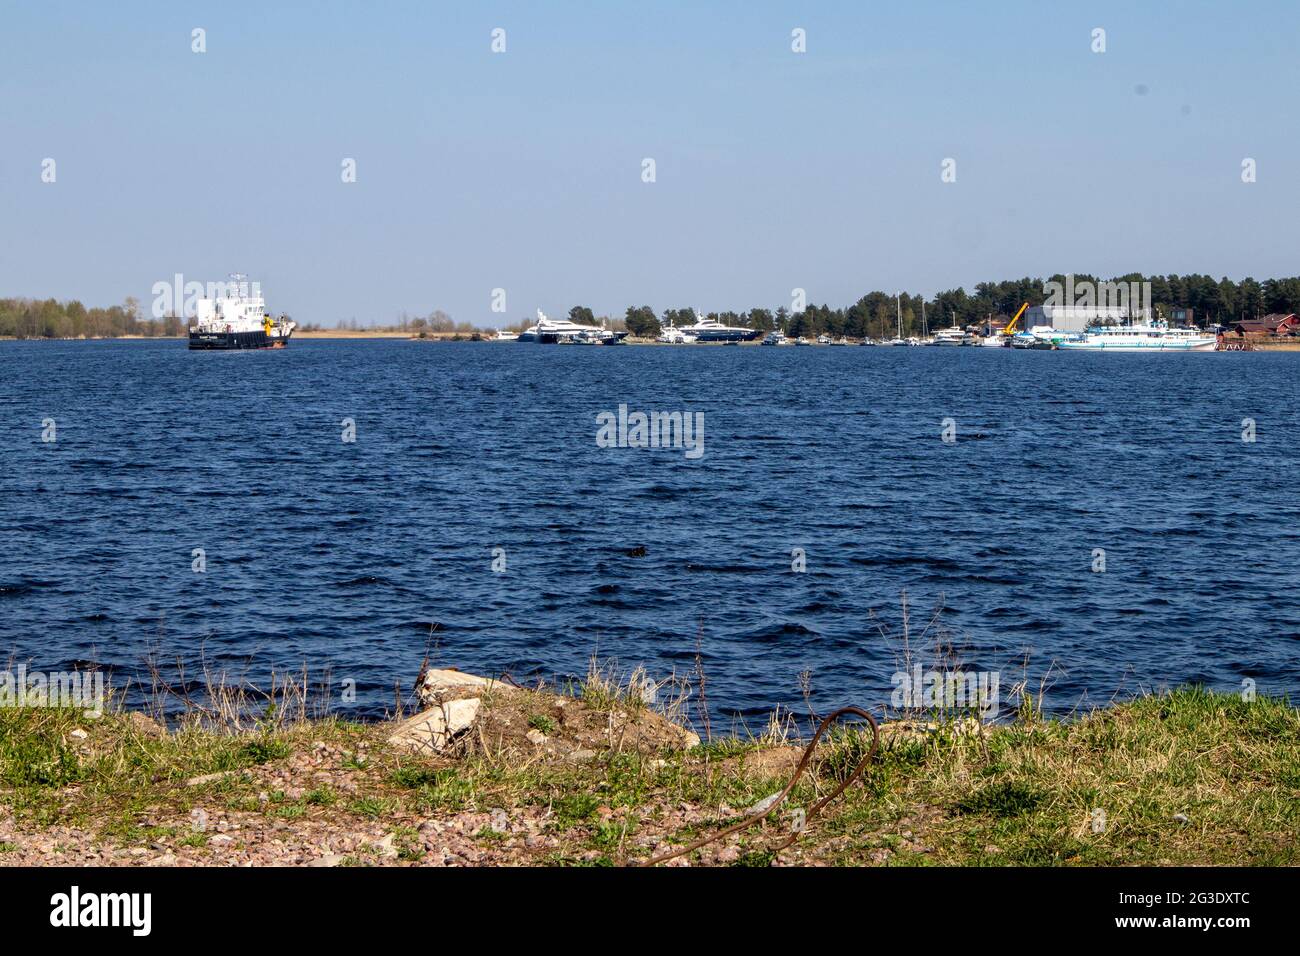 View of the water surface with light waves and pleasure yachts in the distance Stock Photo